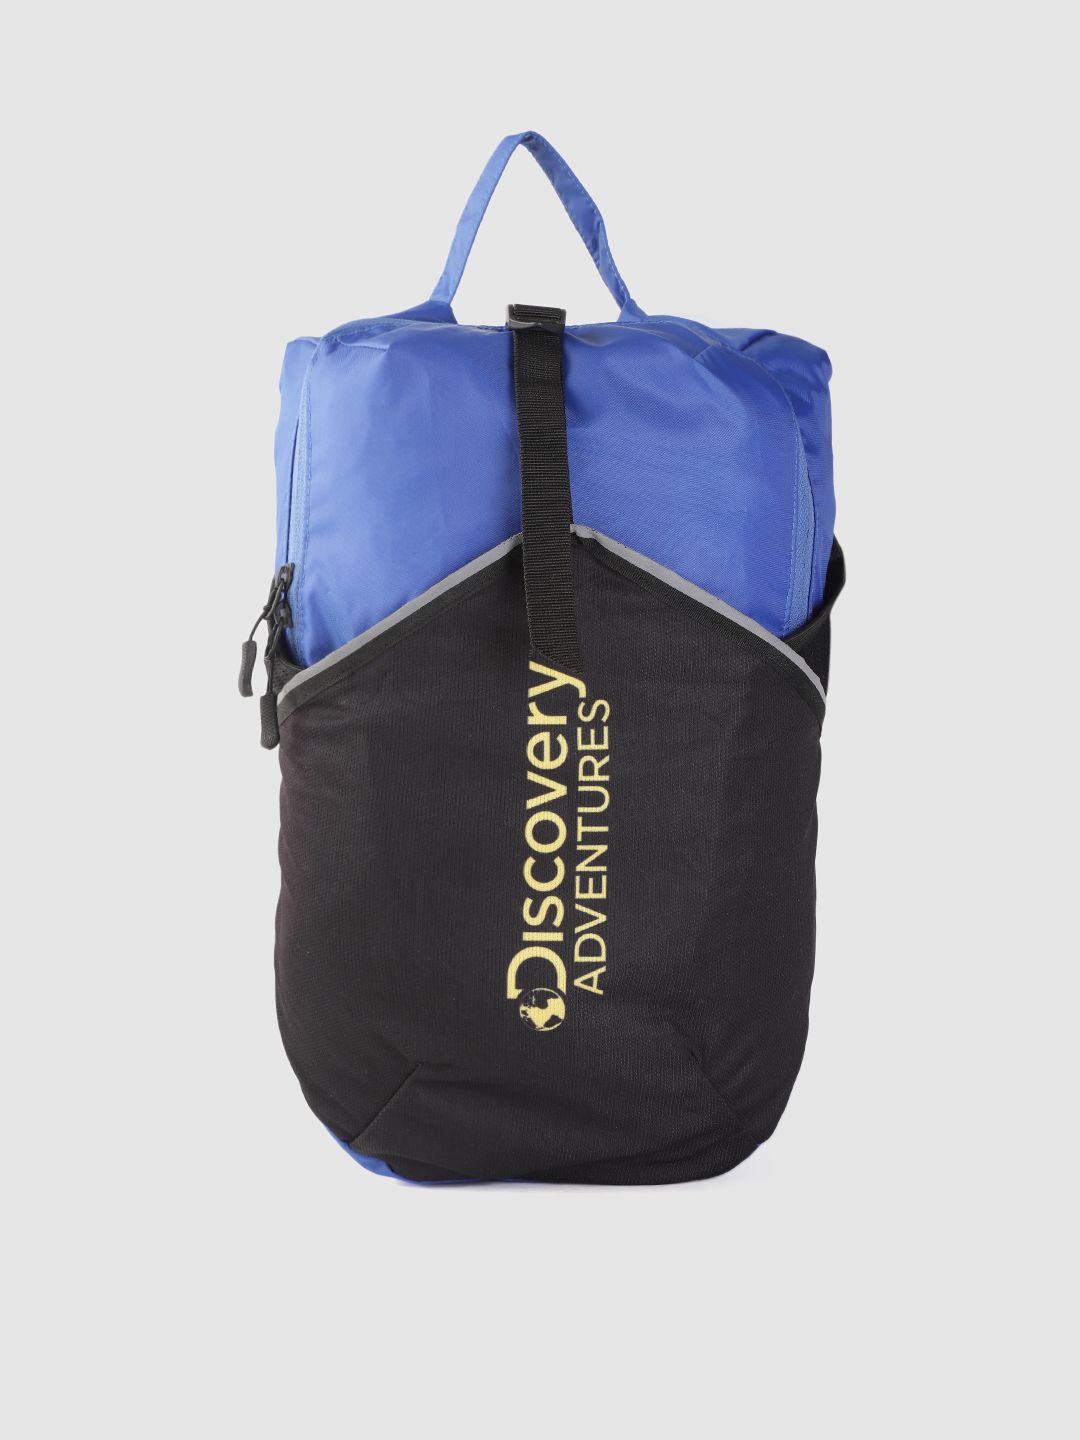 The Roadster Lifestyle Co x Discovery Adventures Unisex Blue & Black Colourblocked Foldable Backpack Price in India